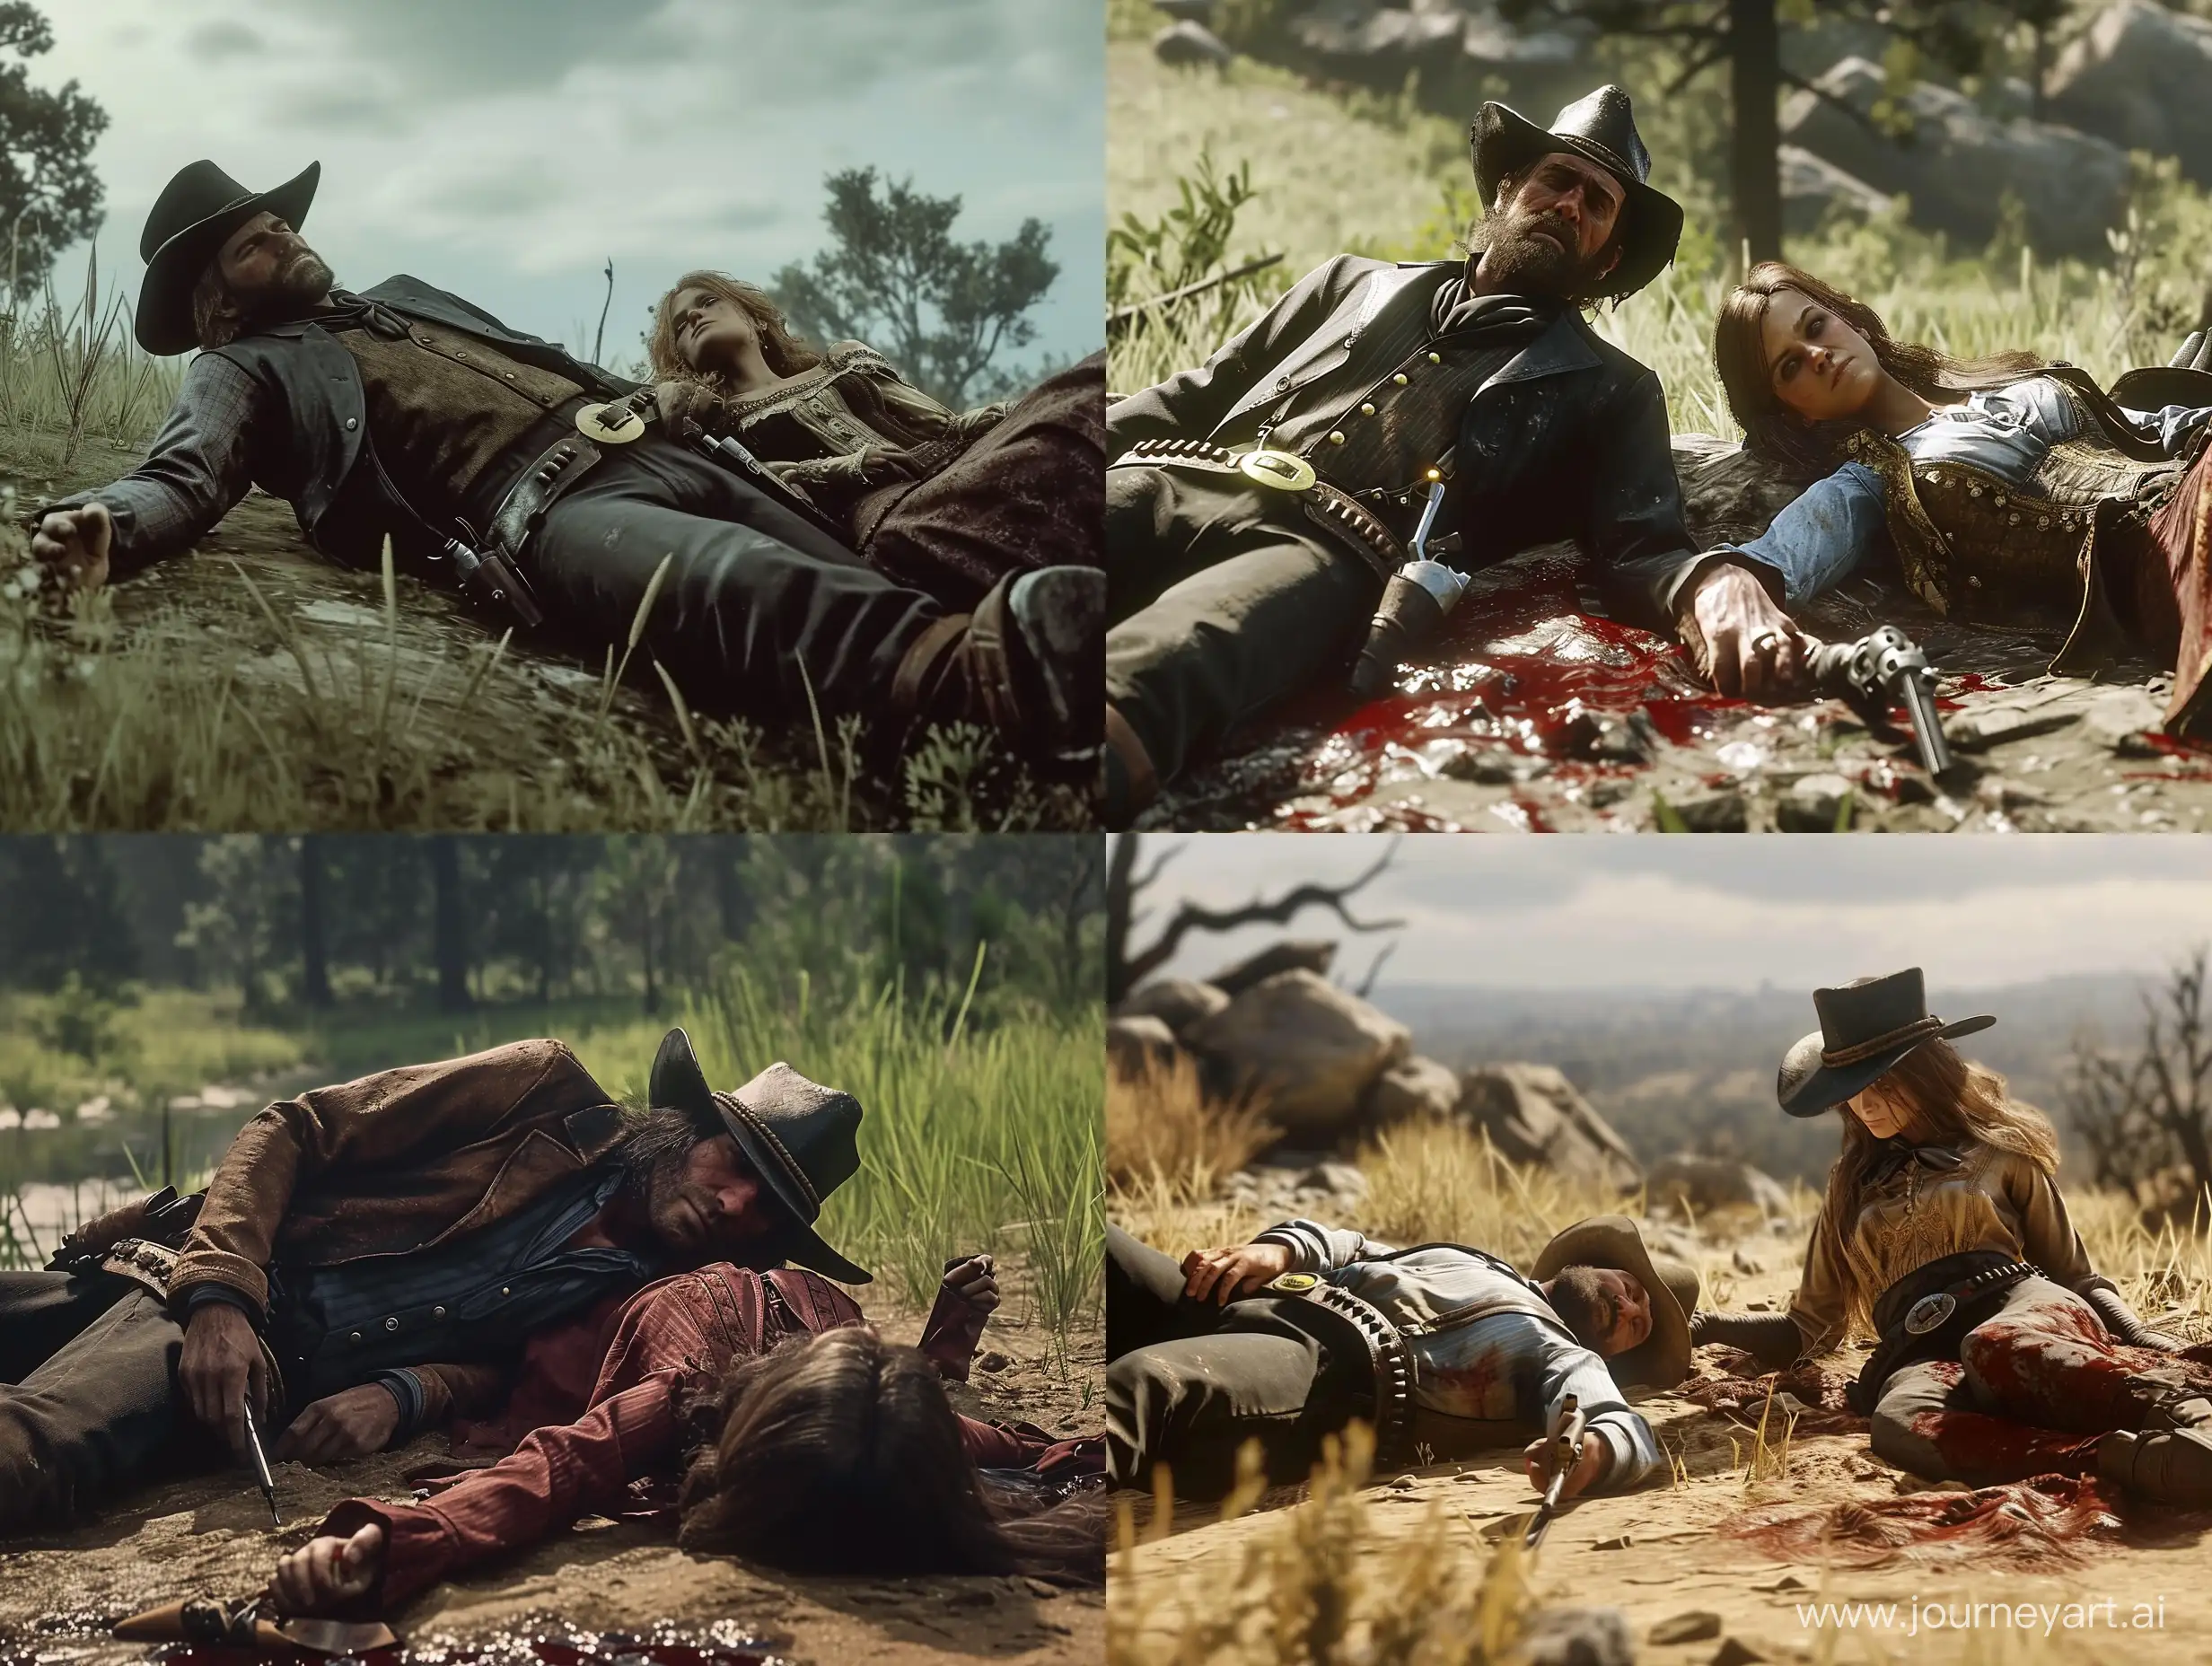 Wild-West-Duel-Tragedy-Arthur-Morgan-and-Lady-Sheriffs-Fate